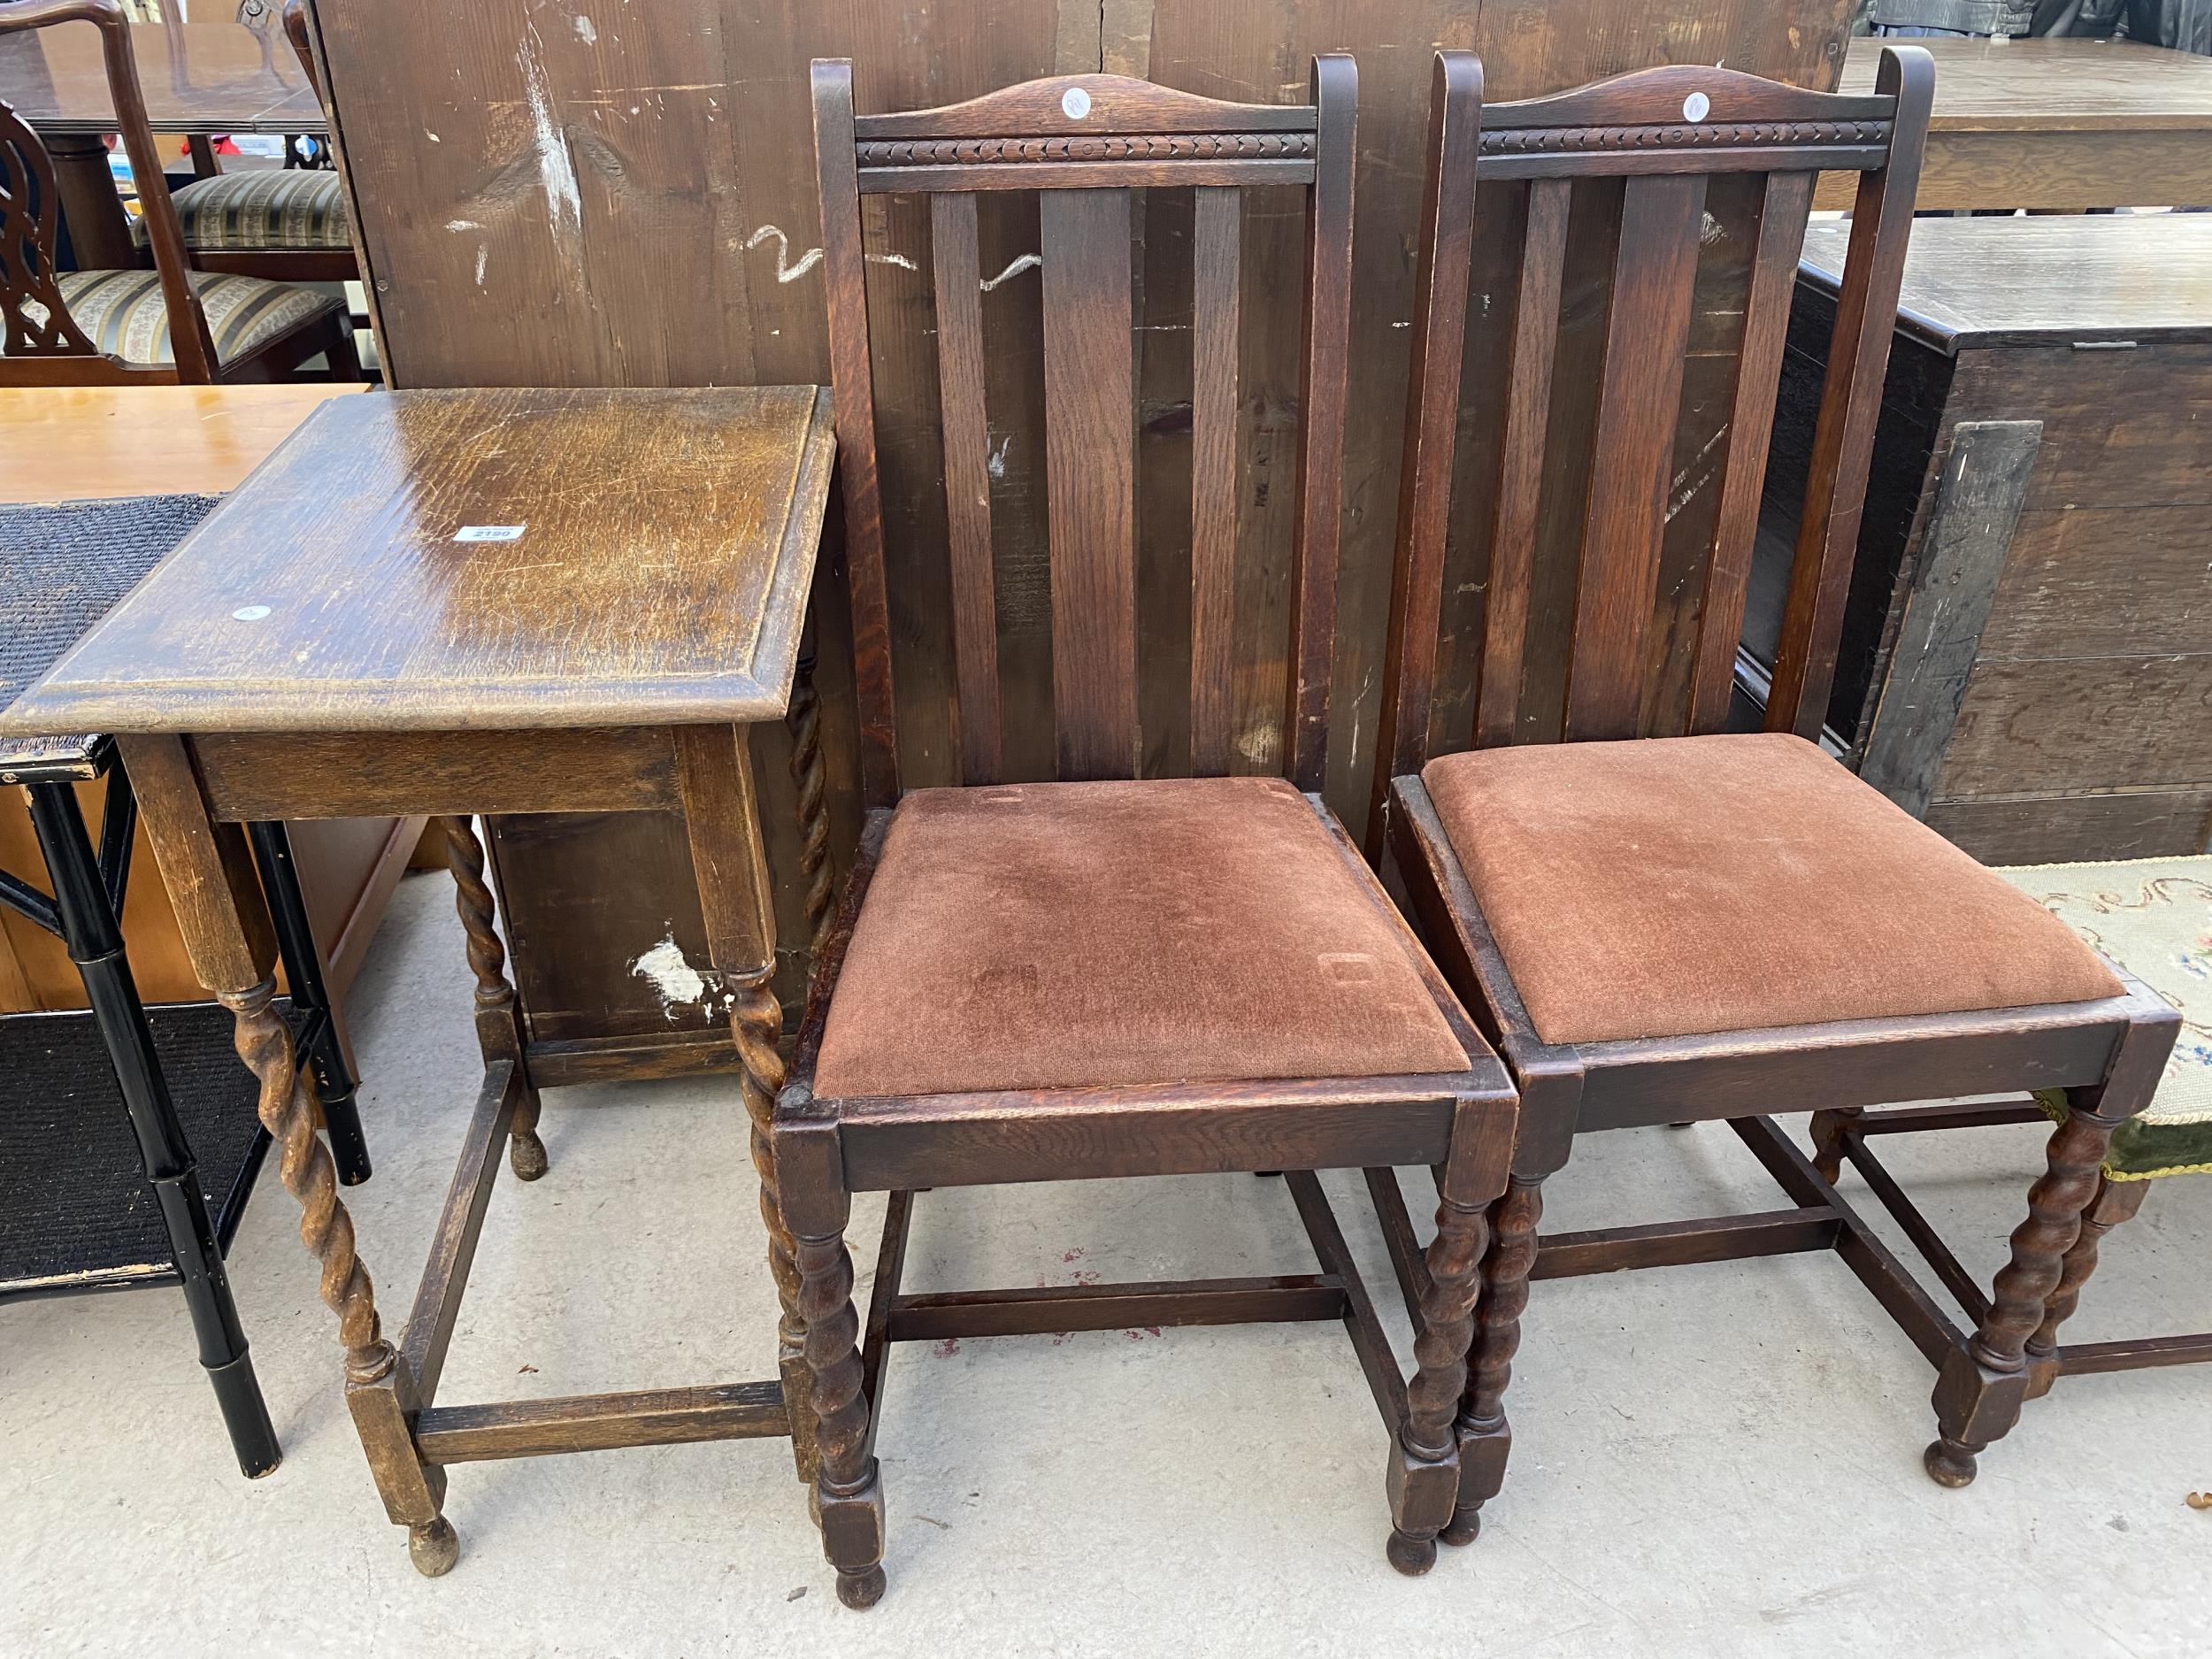 AN EARLY 20TH CENTURY OAK SIDE TABLE WITH BARLEY TWIST SUPPORTS AND TWO OAK DINING CHAIRS